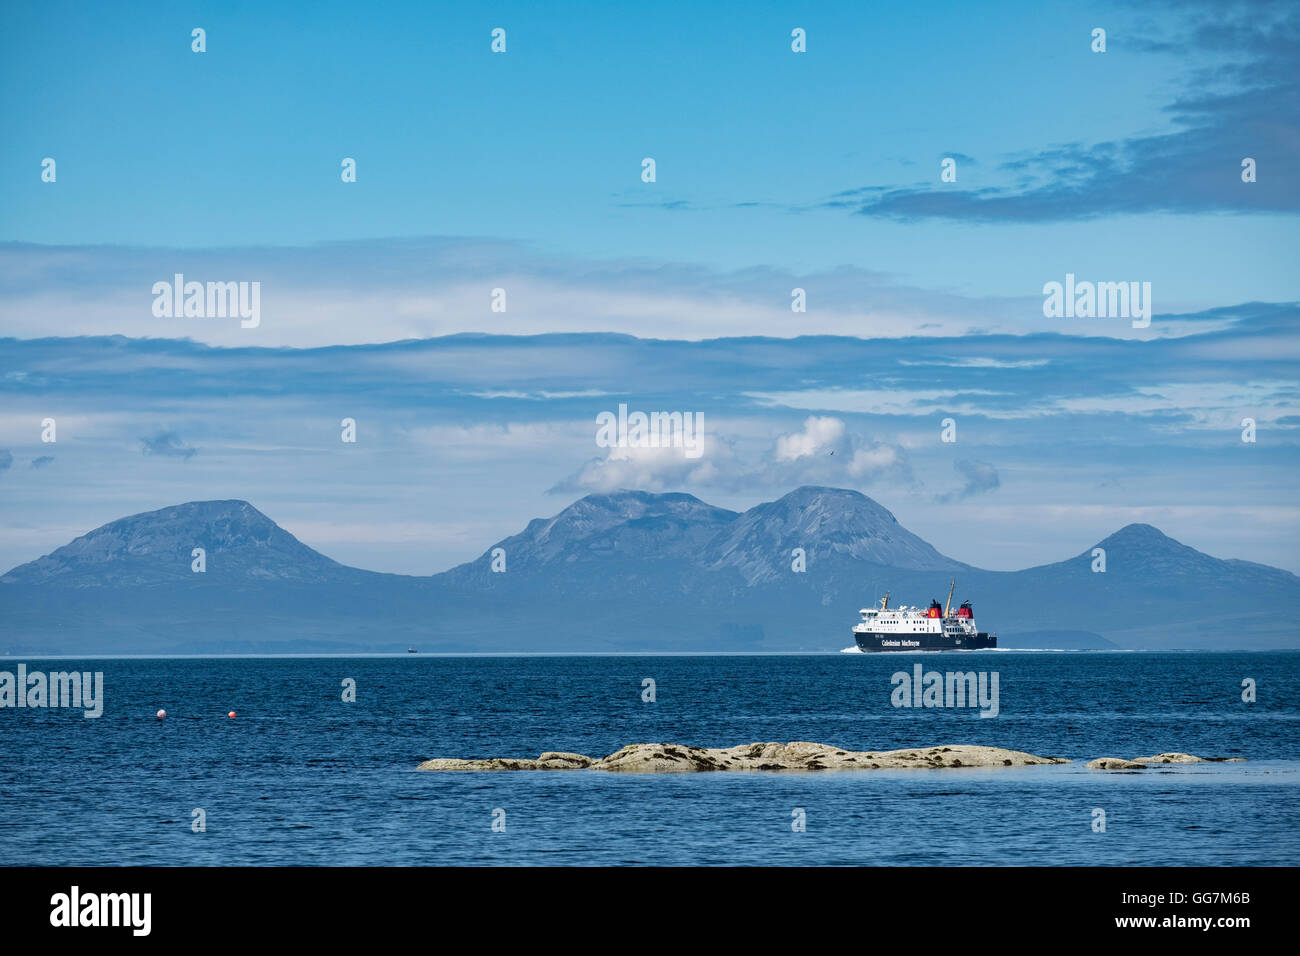 View of The Paps of Jura mountains on the Island of Jura and CalMac passenger ferry from Kintyre Peninsula in Argyll and Bute , Stock Photo